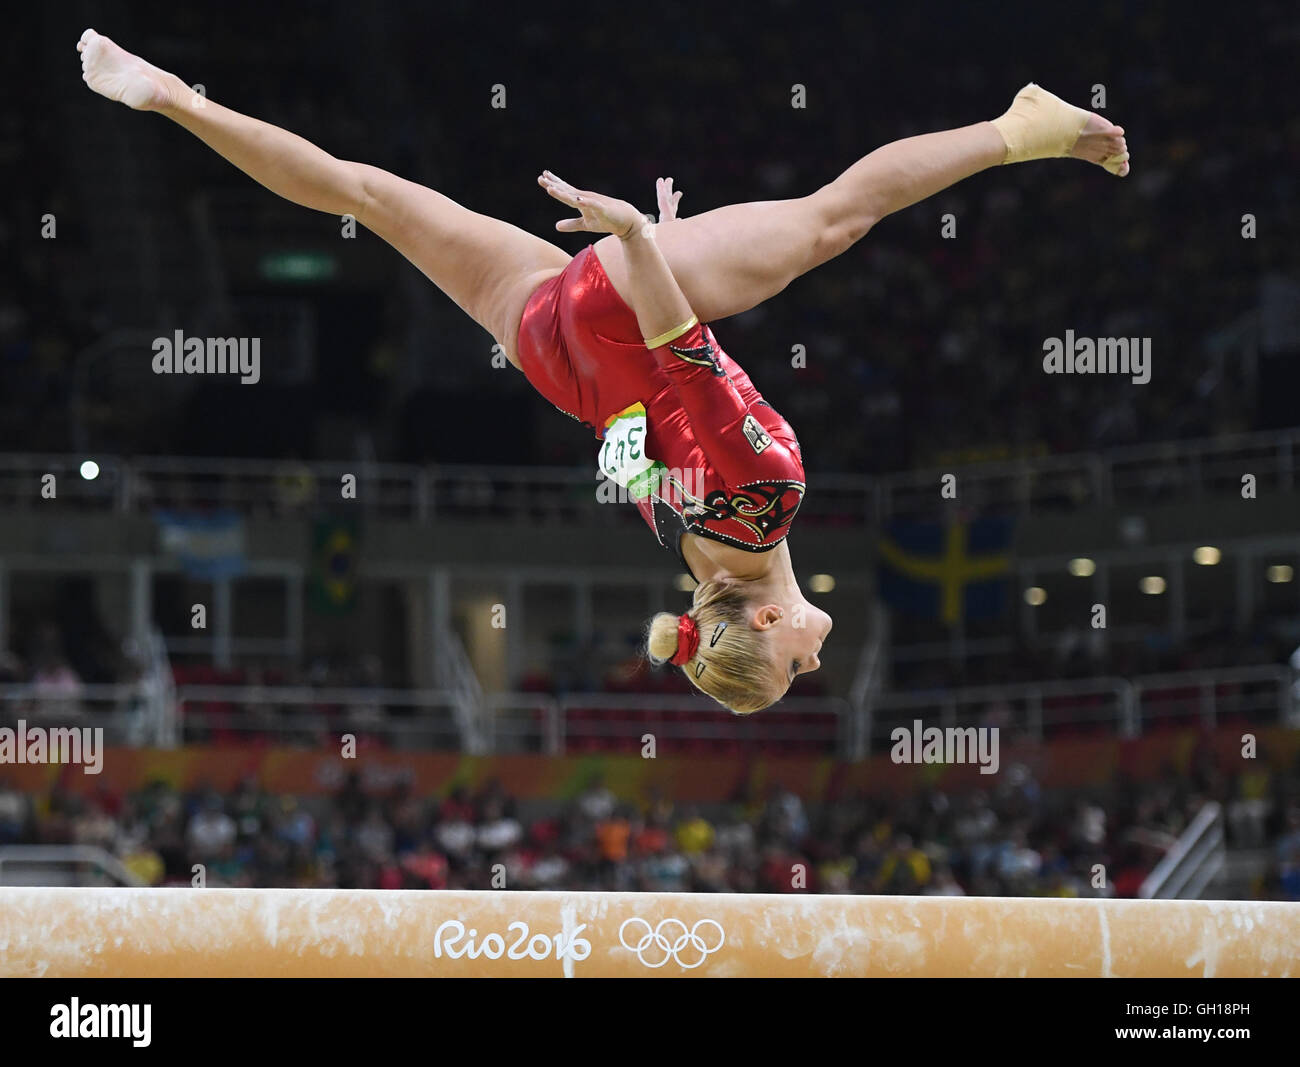 Rio de Janeiro, Brazil 07th Aug, 2016 Elisabeth Seitz of Germany competes on the balance beam during the Women's Qualification Artistic Gymnastics event of the Rio 2016 Olympic Games at the Rio Olympic Arena, Rio de Janeiro, Brazil, 7 August 2016. Photo: Felix Kaestle/dpa Credit:  dpa picture alliance/Alamy Live News Stock Photo